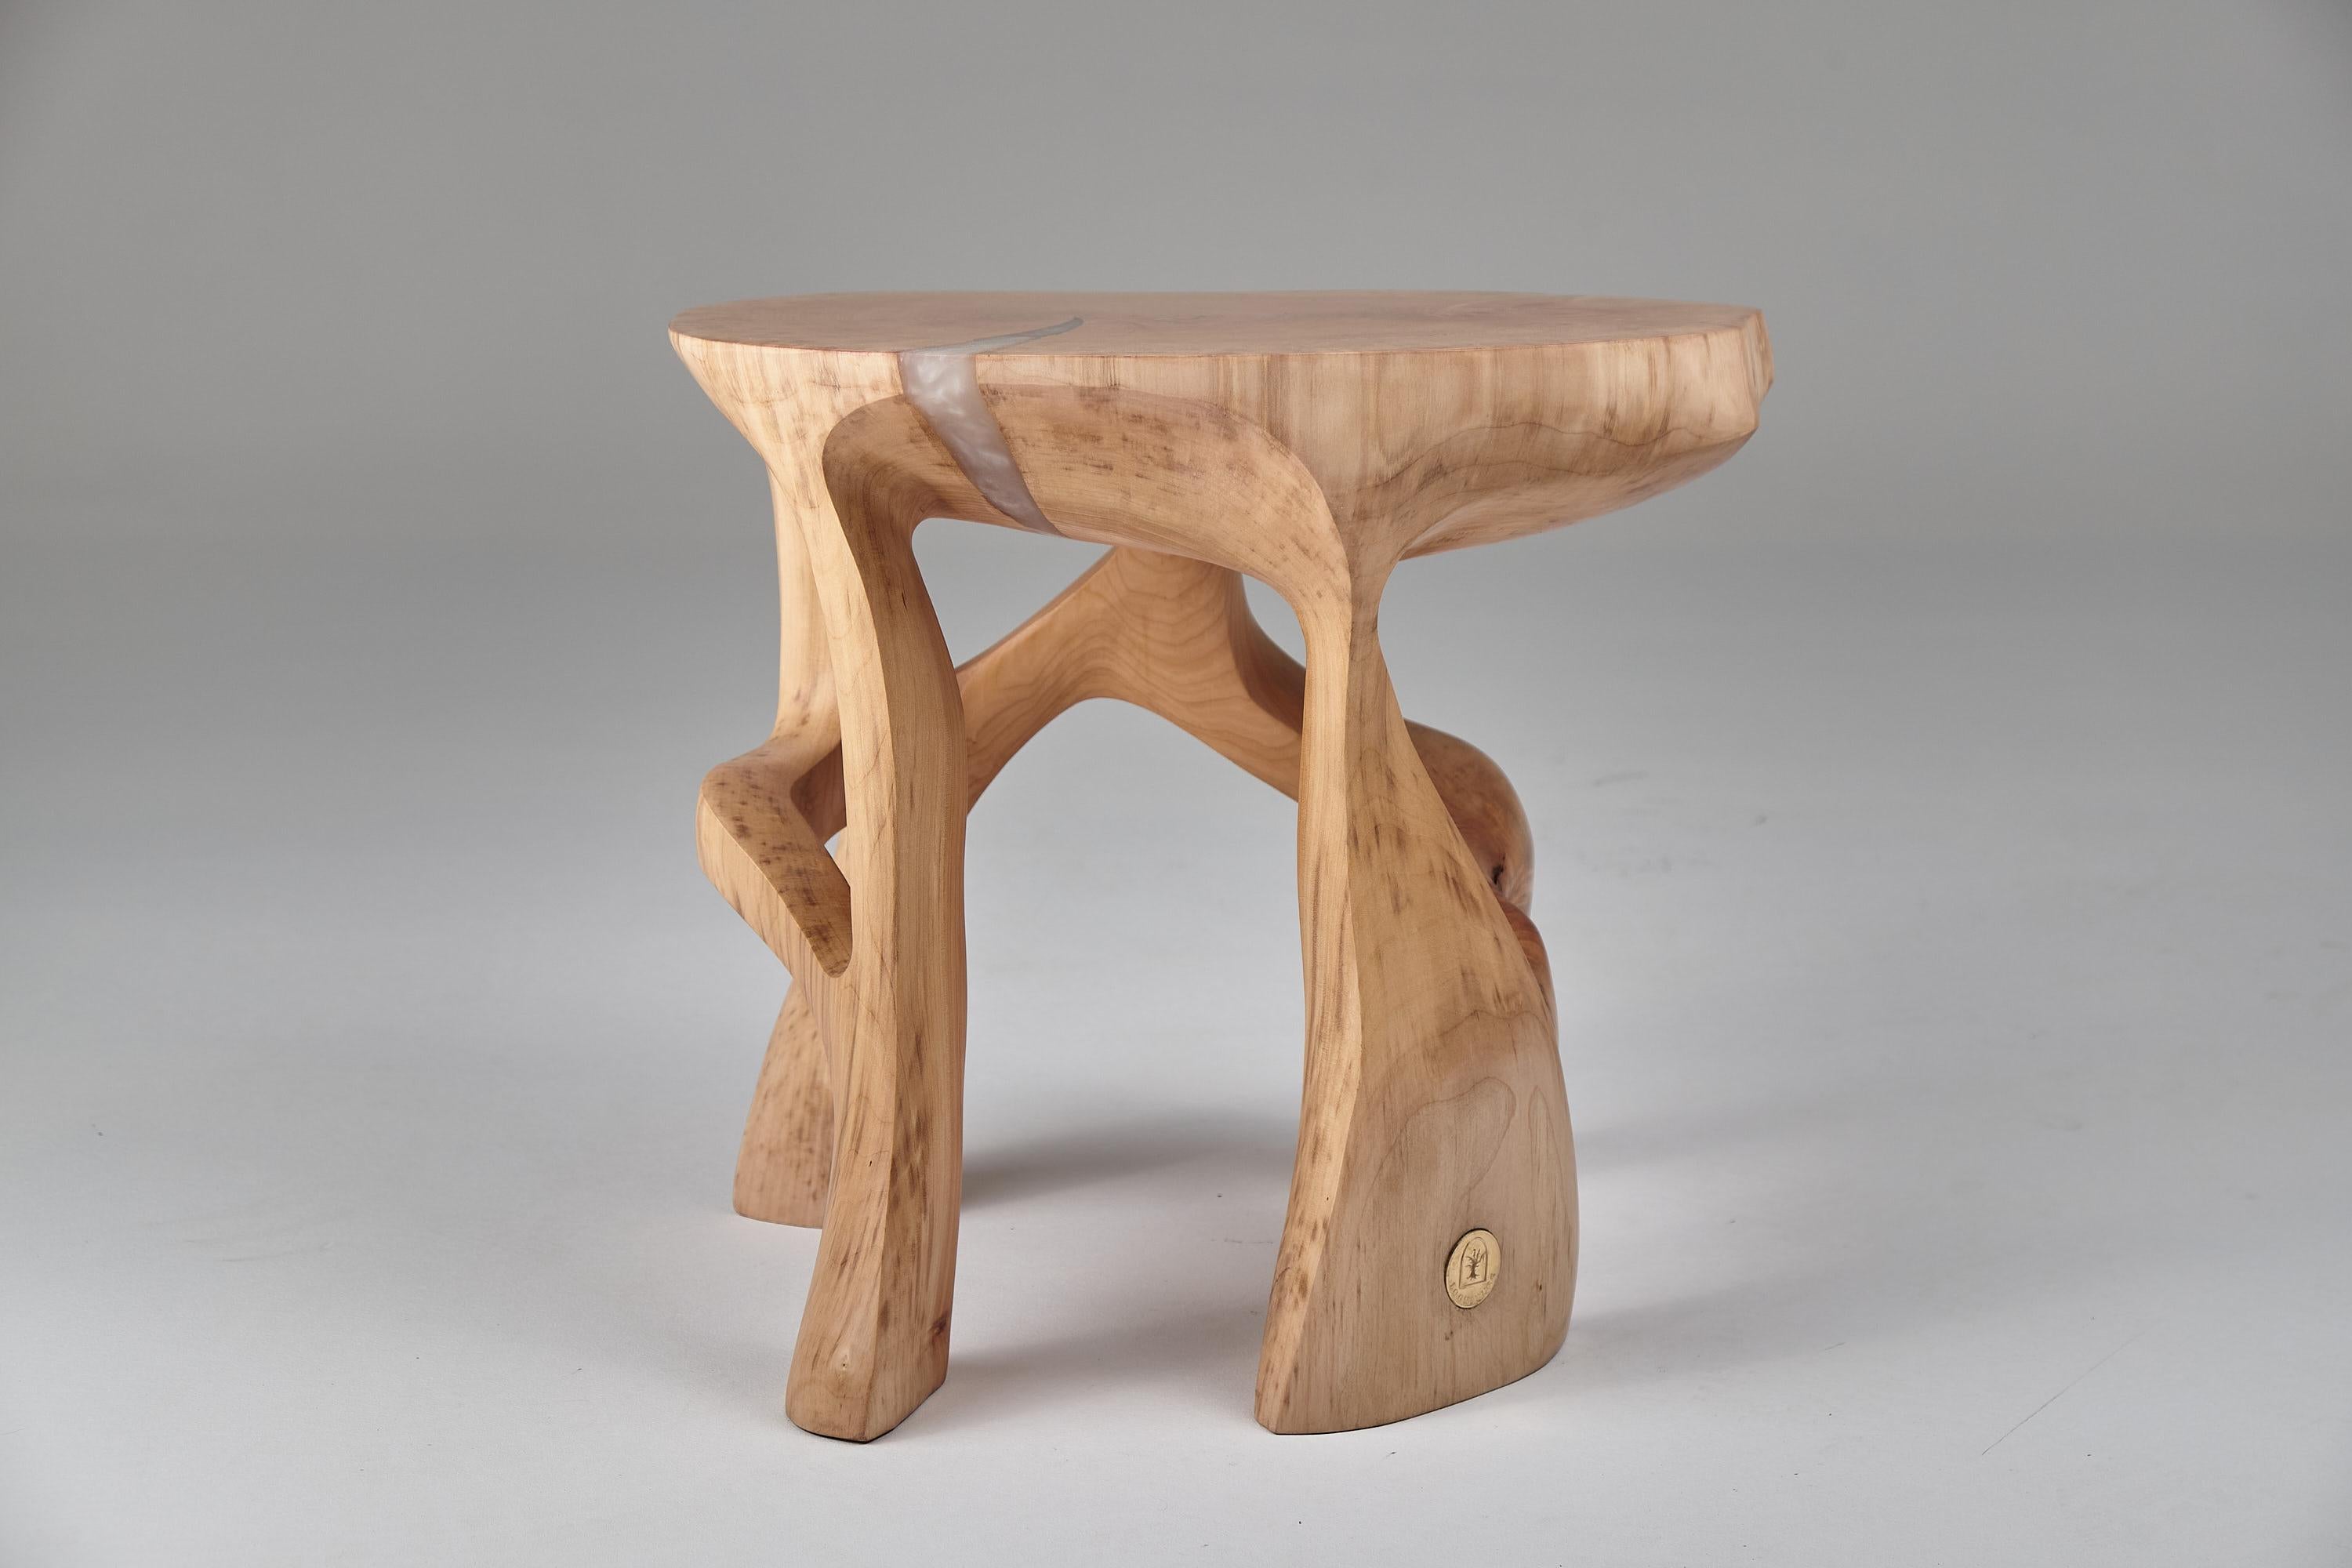 Unique functional sculpture carved from a single piece of wood in the shape of a side table, stool, night table or even pedestal. Each piece in our production is carved by artists with basic wood carving power tools. Every table is made as unique as